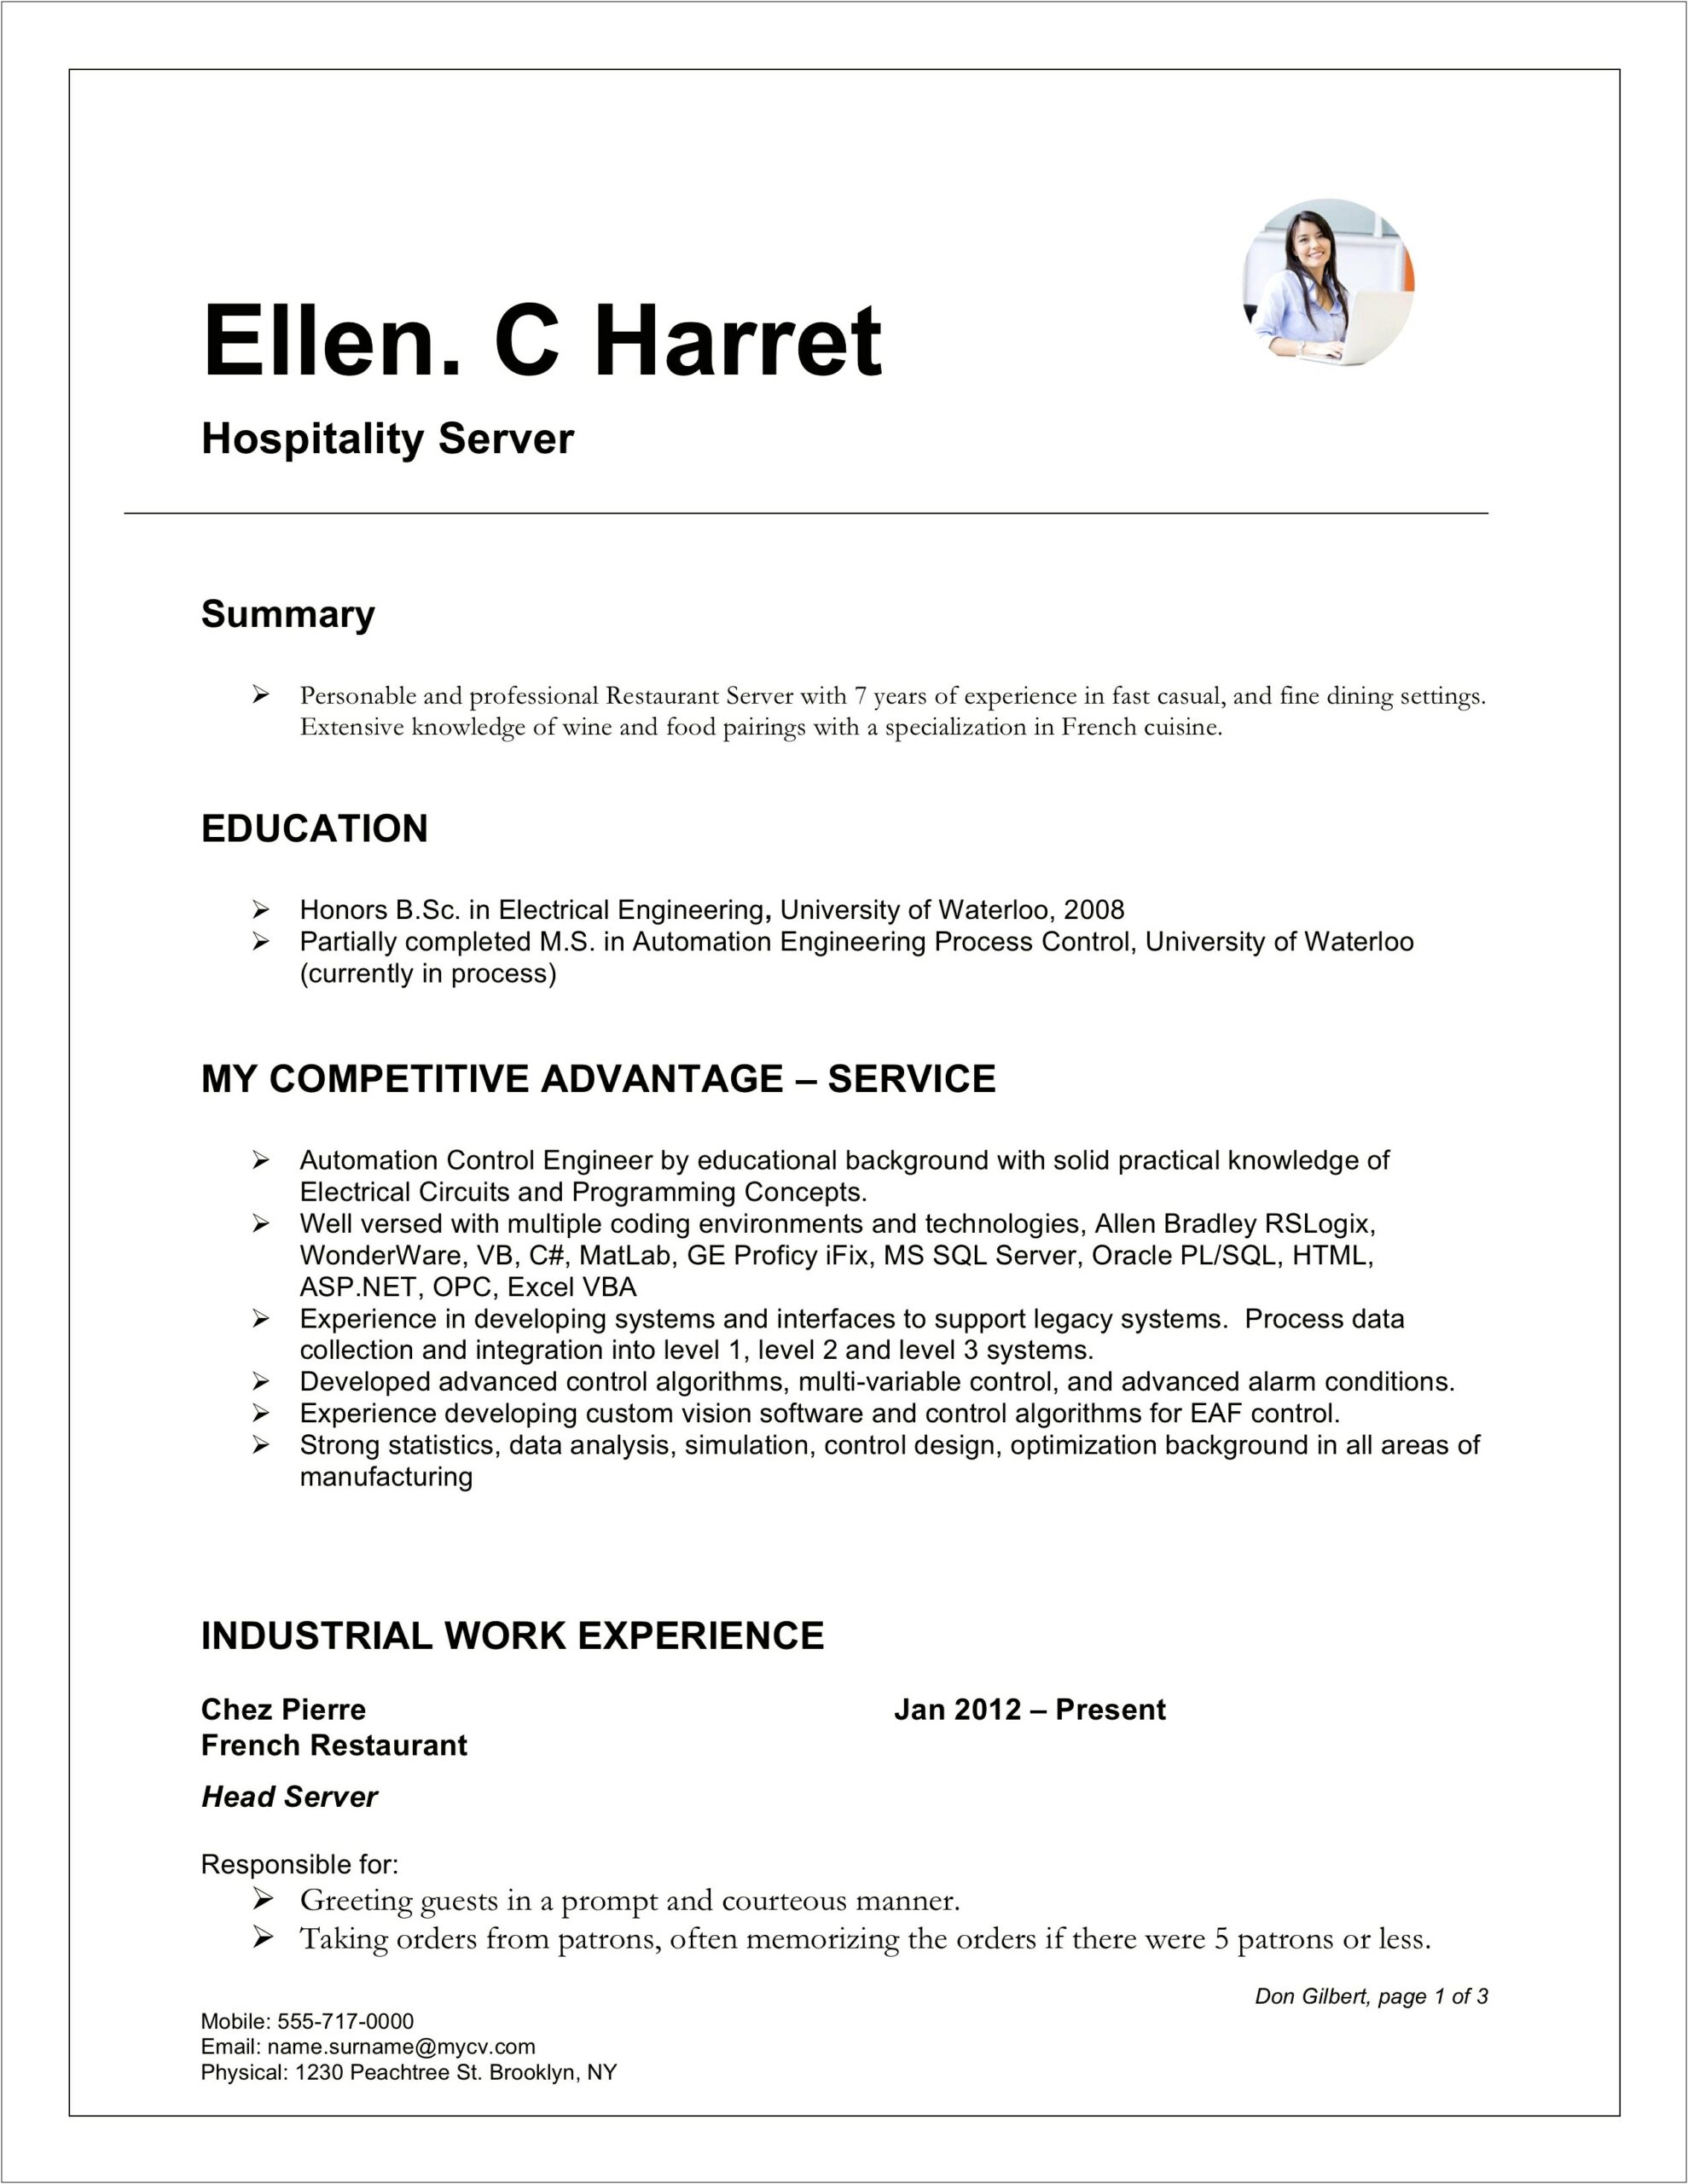 Resume For Someone With Serving Experience